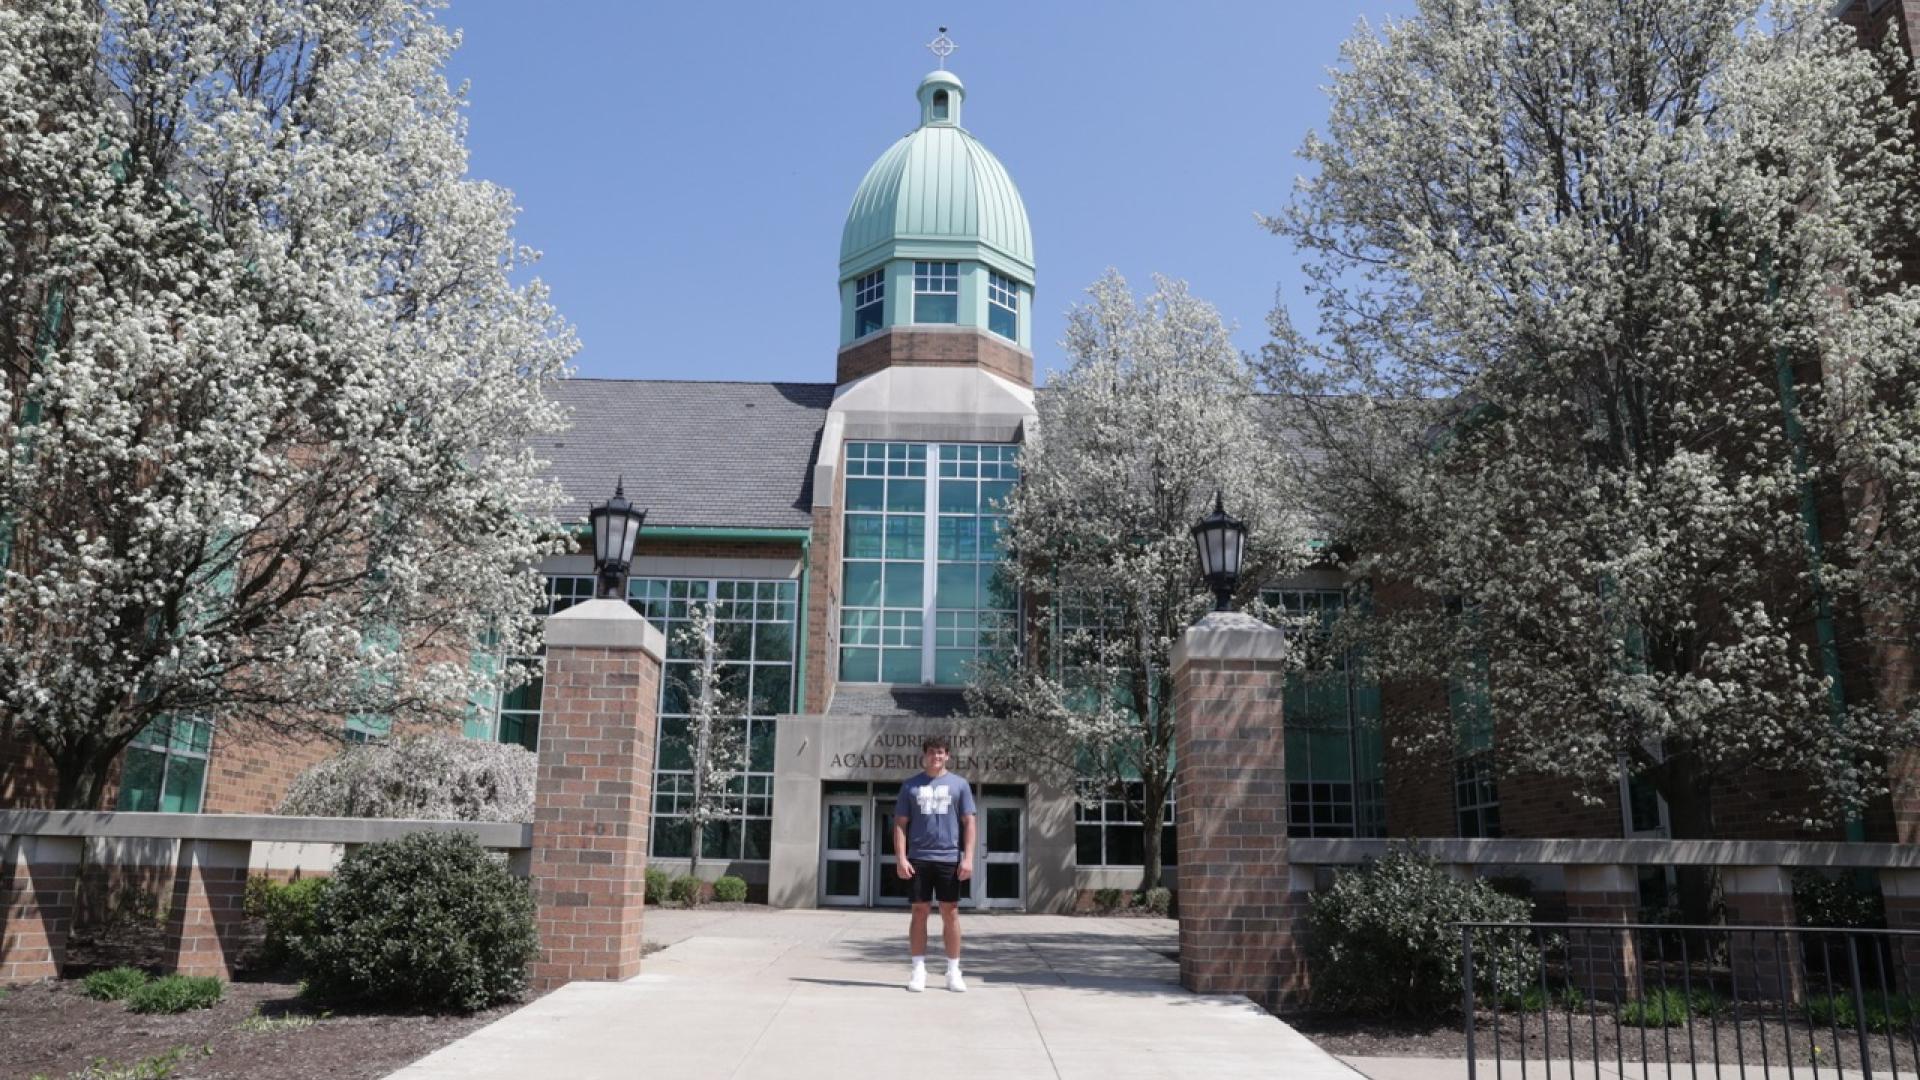 Student in front of Audrey Hirt building